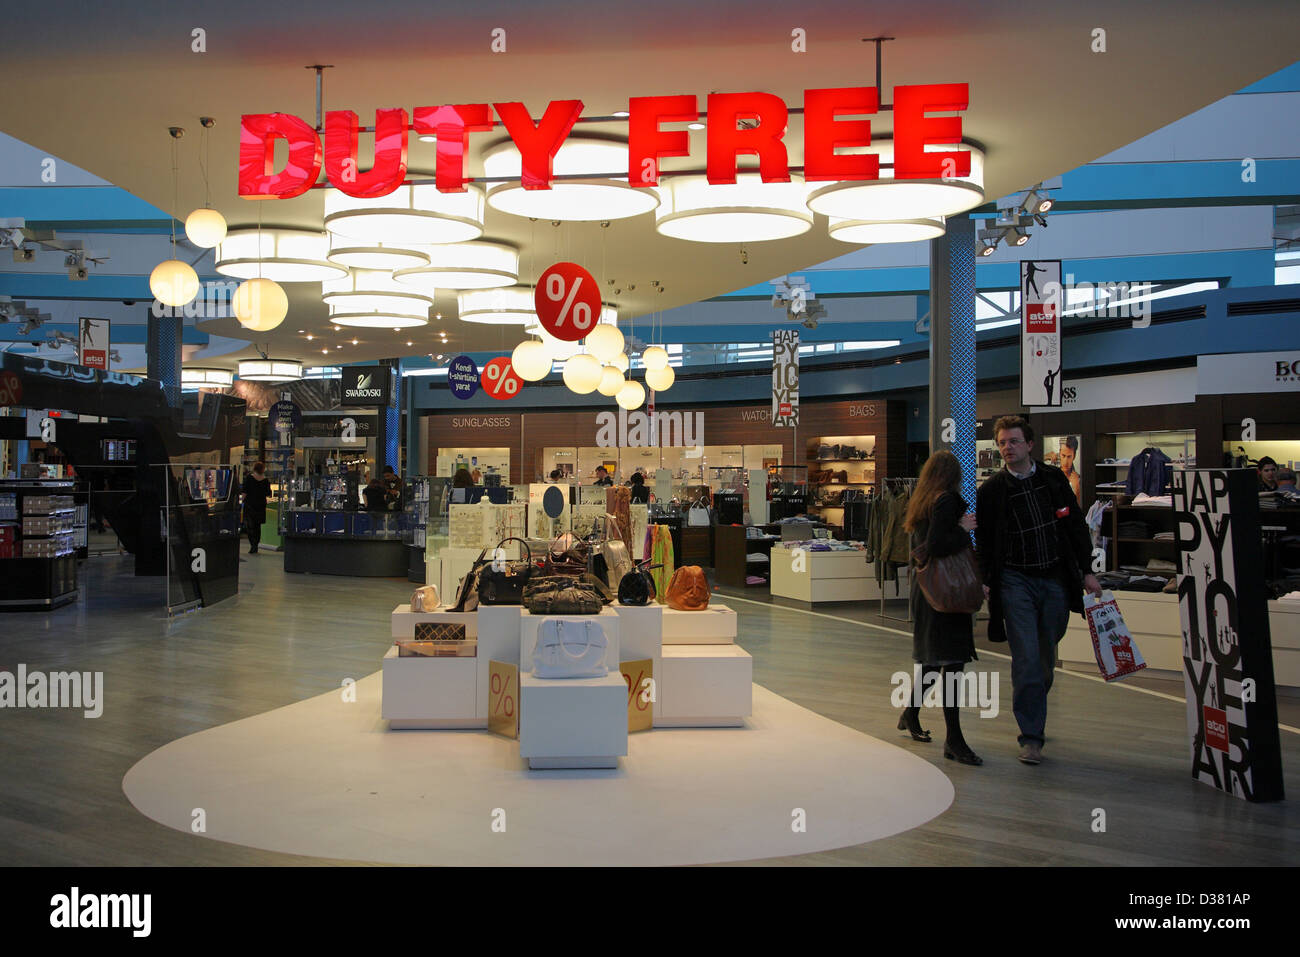 ATÜ Duty Free and Bulgari open pop-up store at Istanbul Airport